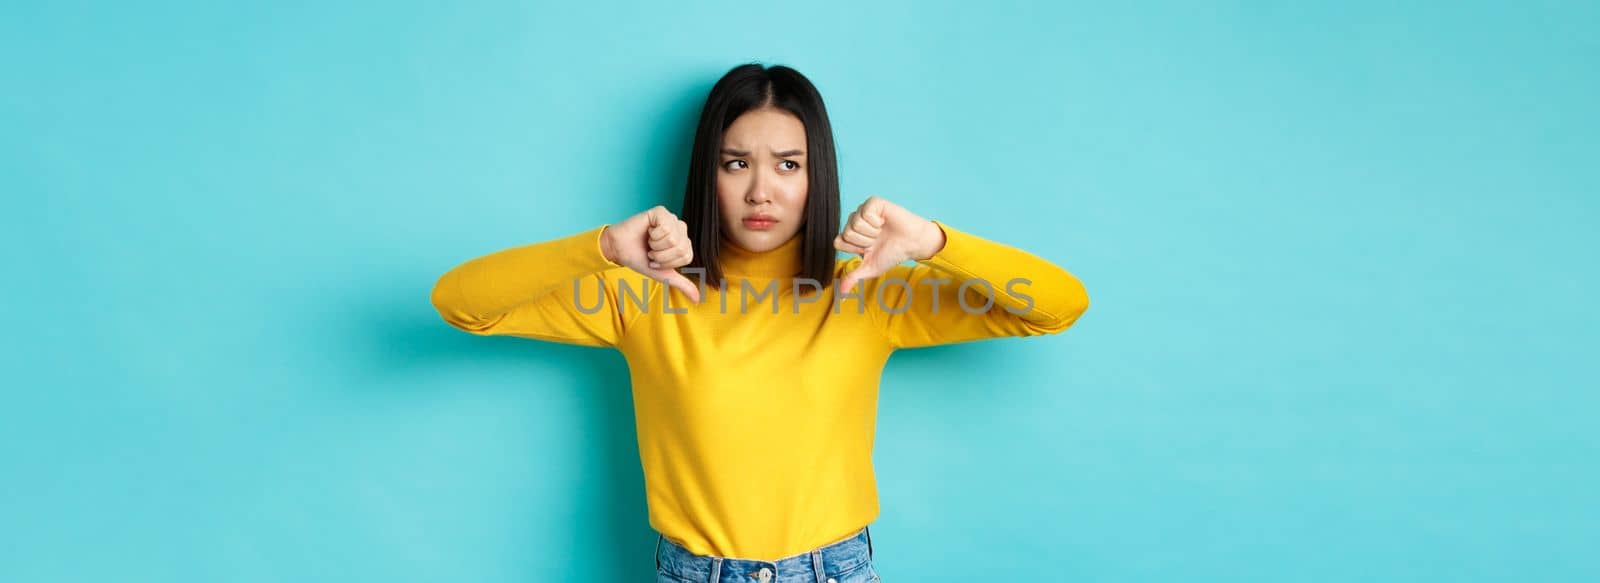 Disappointed asian woman frowning upset, showing thumbs down in dislike and disapproval, standing over blue background, looking left.